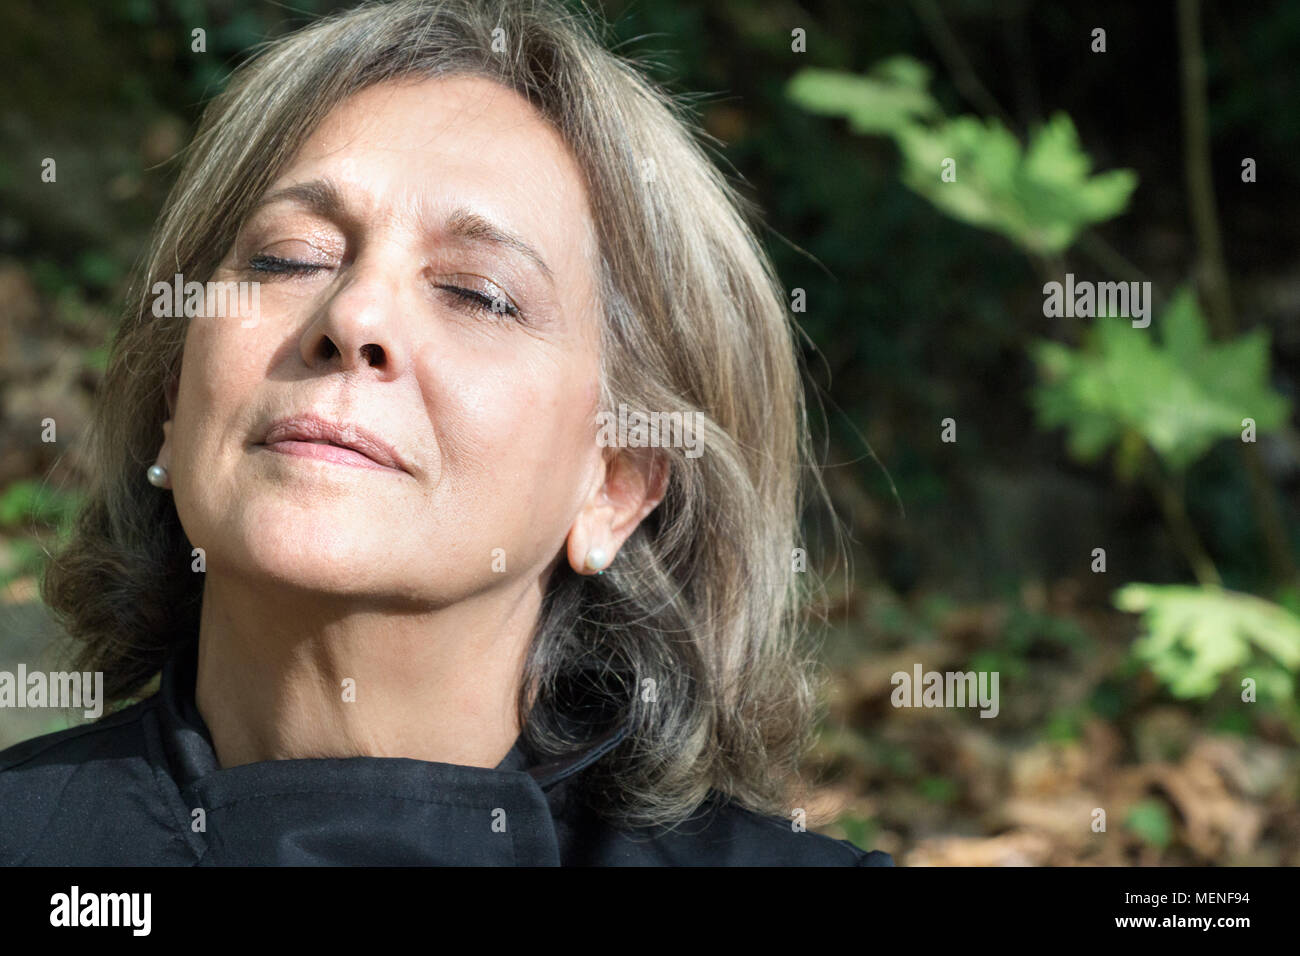 Portrait of a mature woman with closed eyes, relaxed, outdoors. Stock Photo